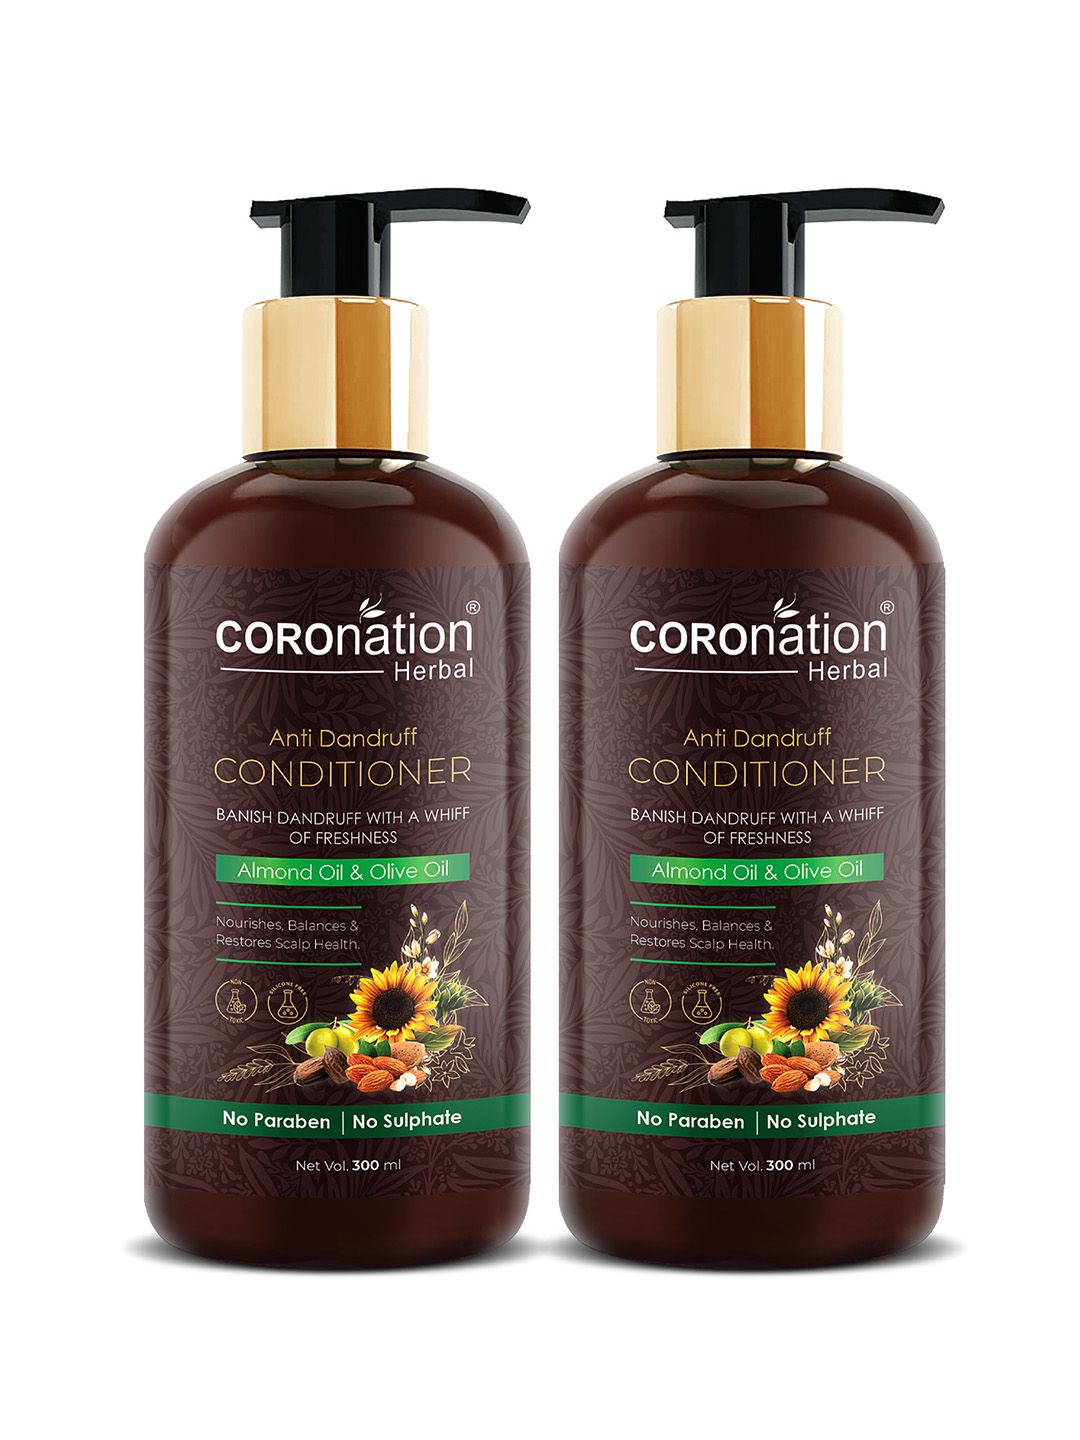 COROnation Herbal Set of 2 Anti Dandruff Conditioner with Almond Oil-Olive Oil 300 ml each Price in India